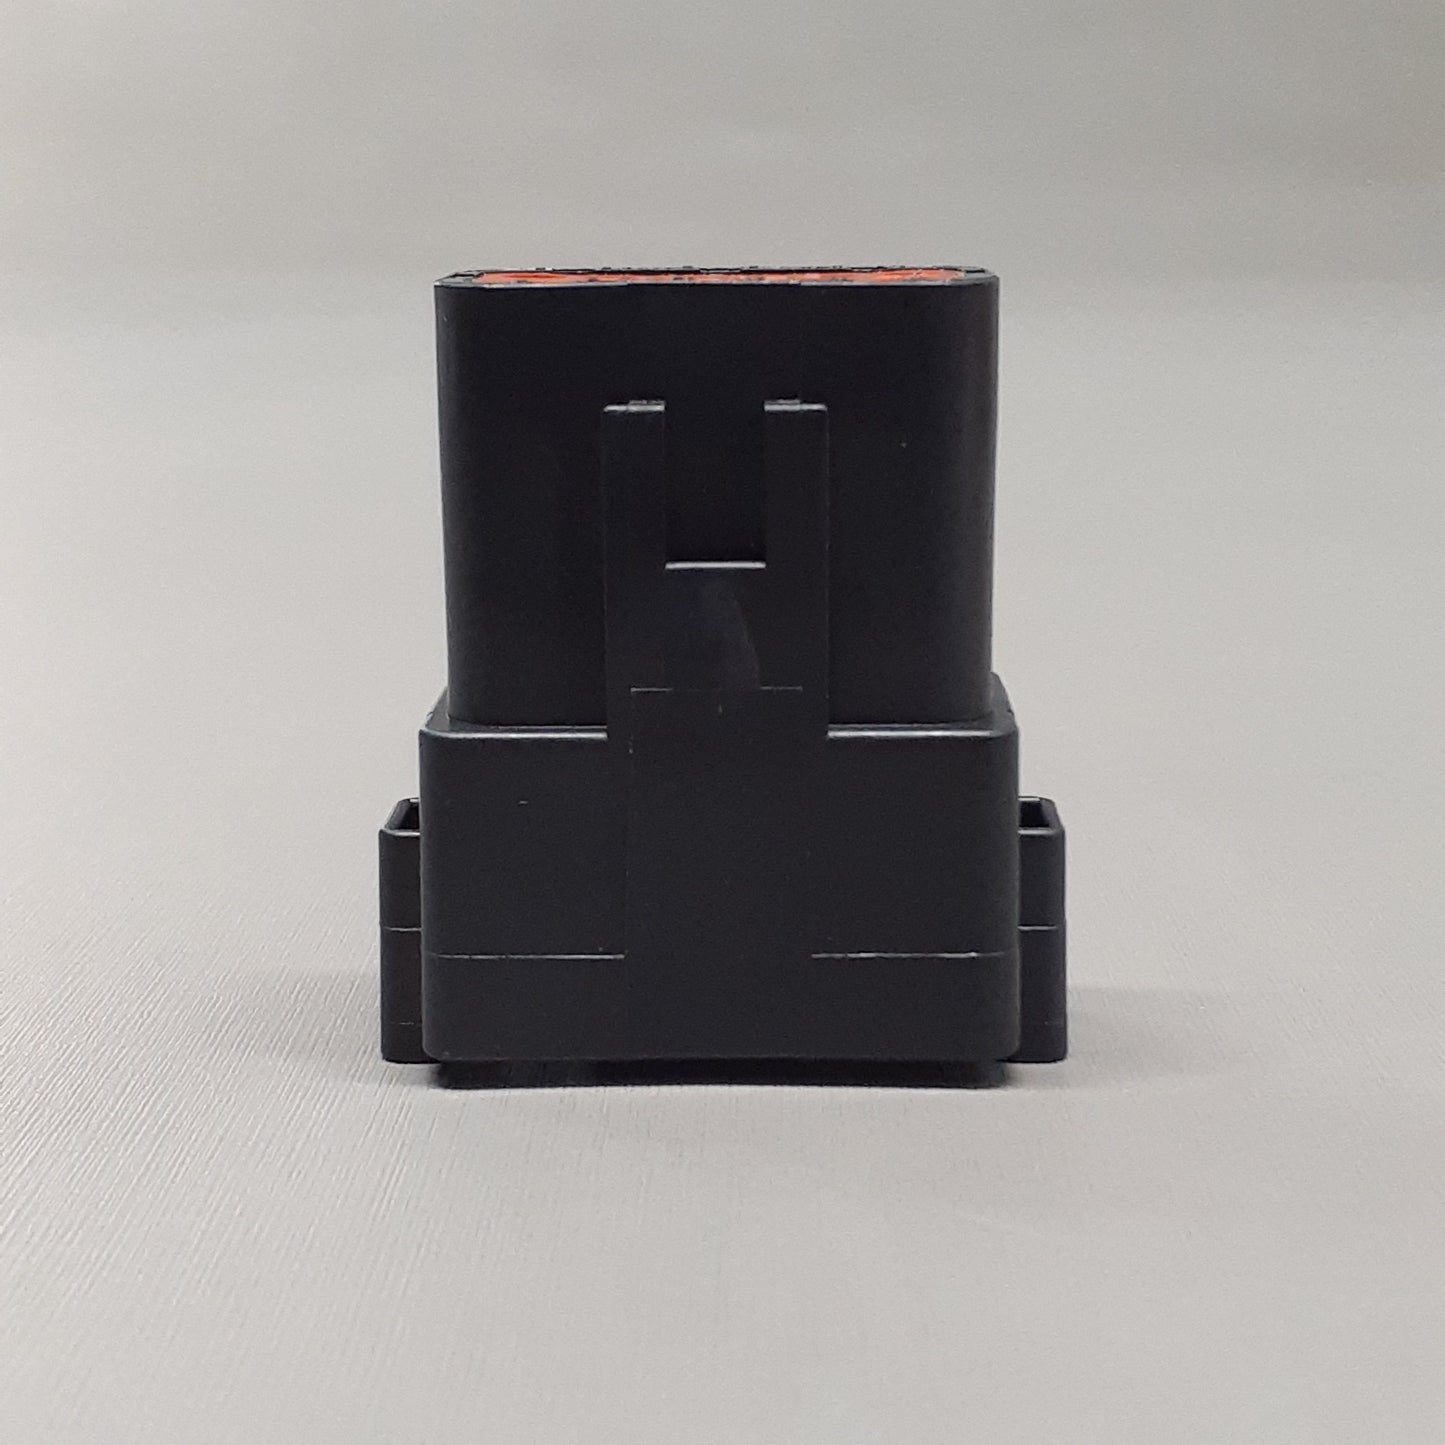 TE CONNECTIVITY 10 Pk Housing for Male Terminals DT04-12PA-E004 (New)